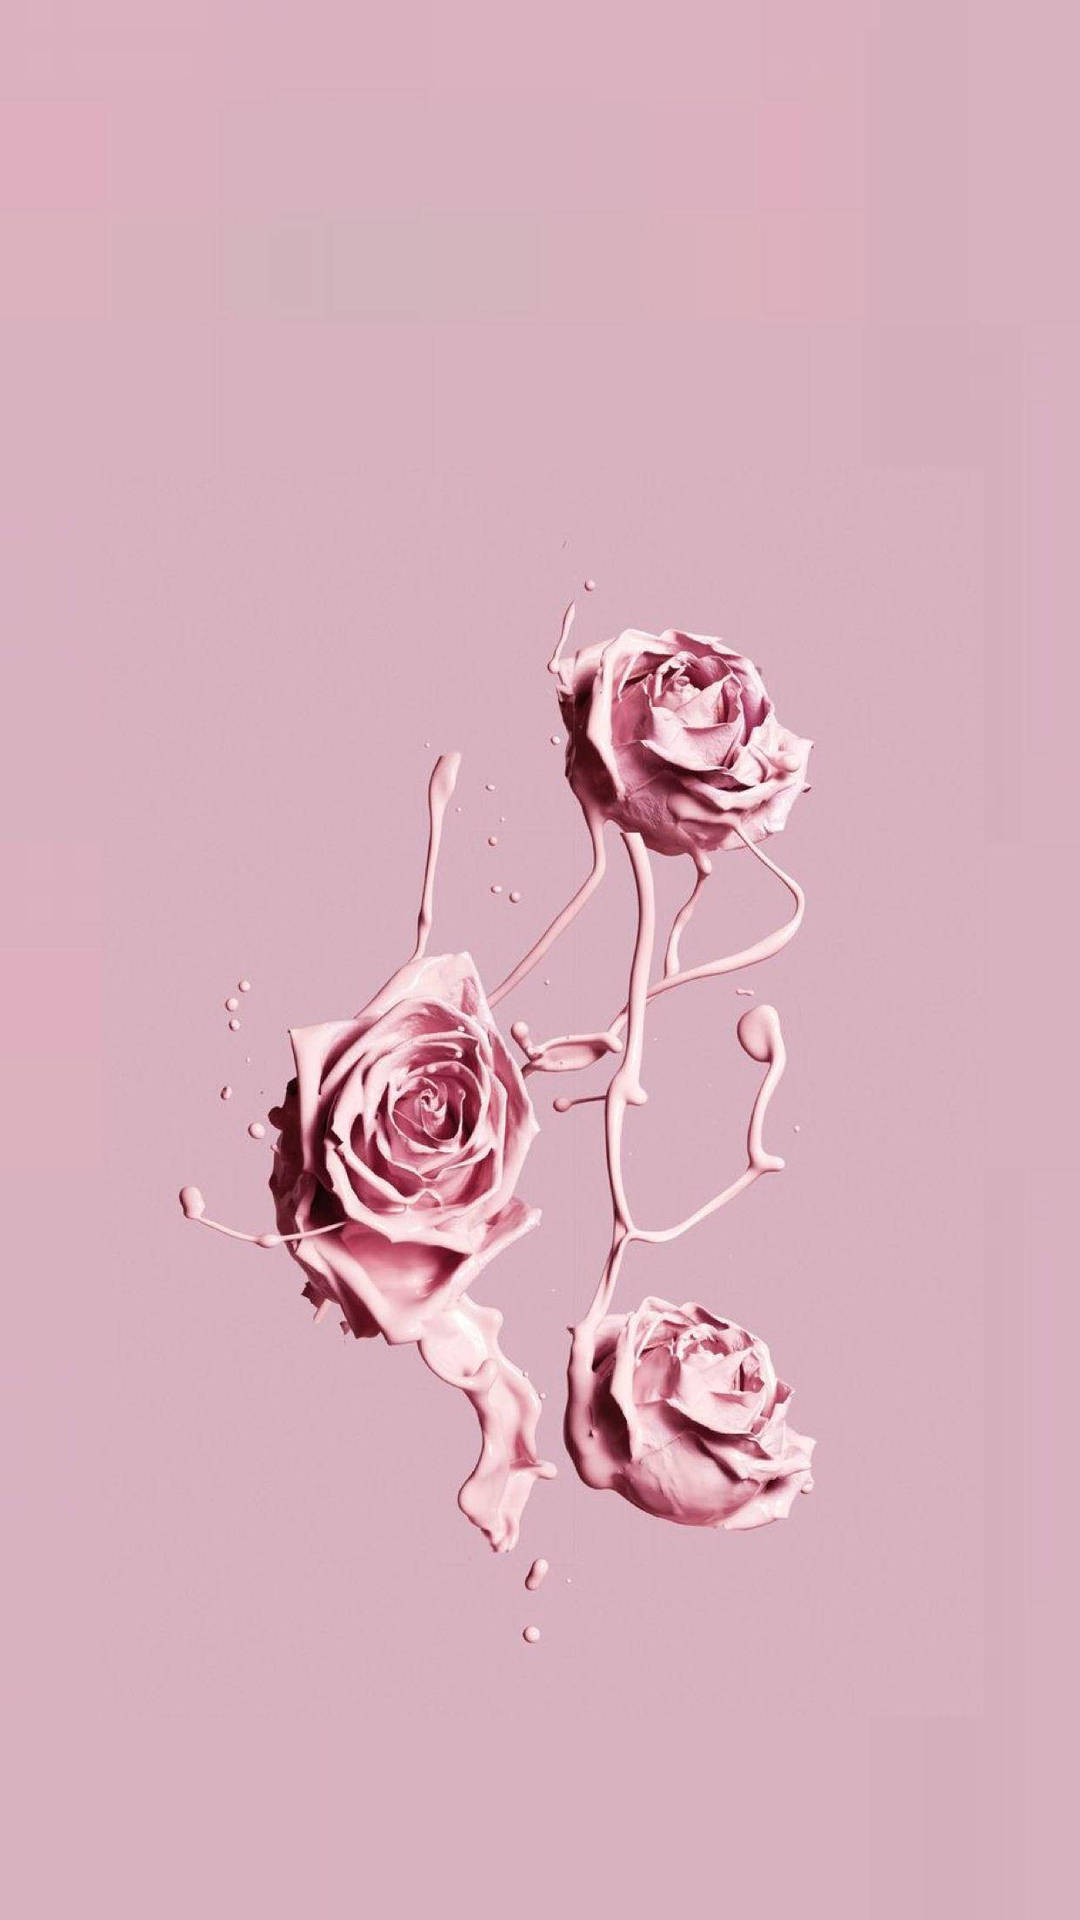 Paint Drops For Pink Girl Iphone Wallpaper